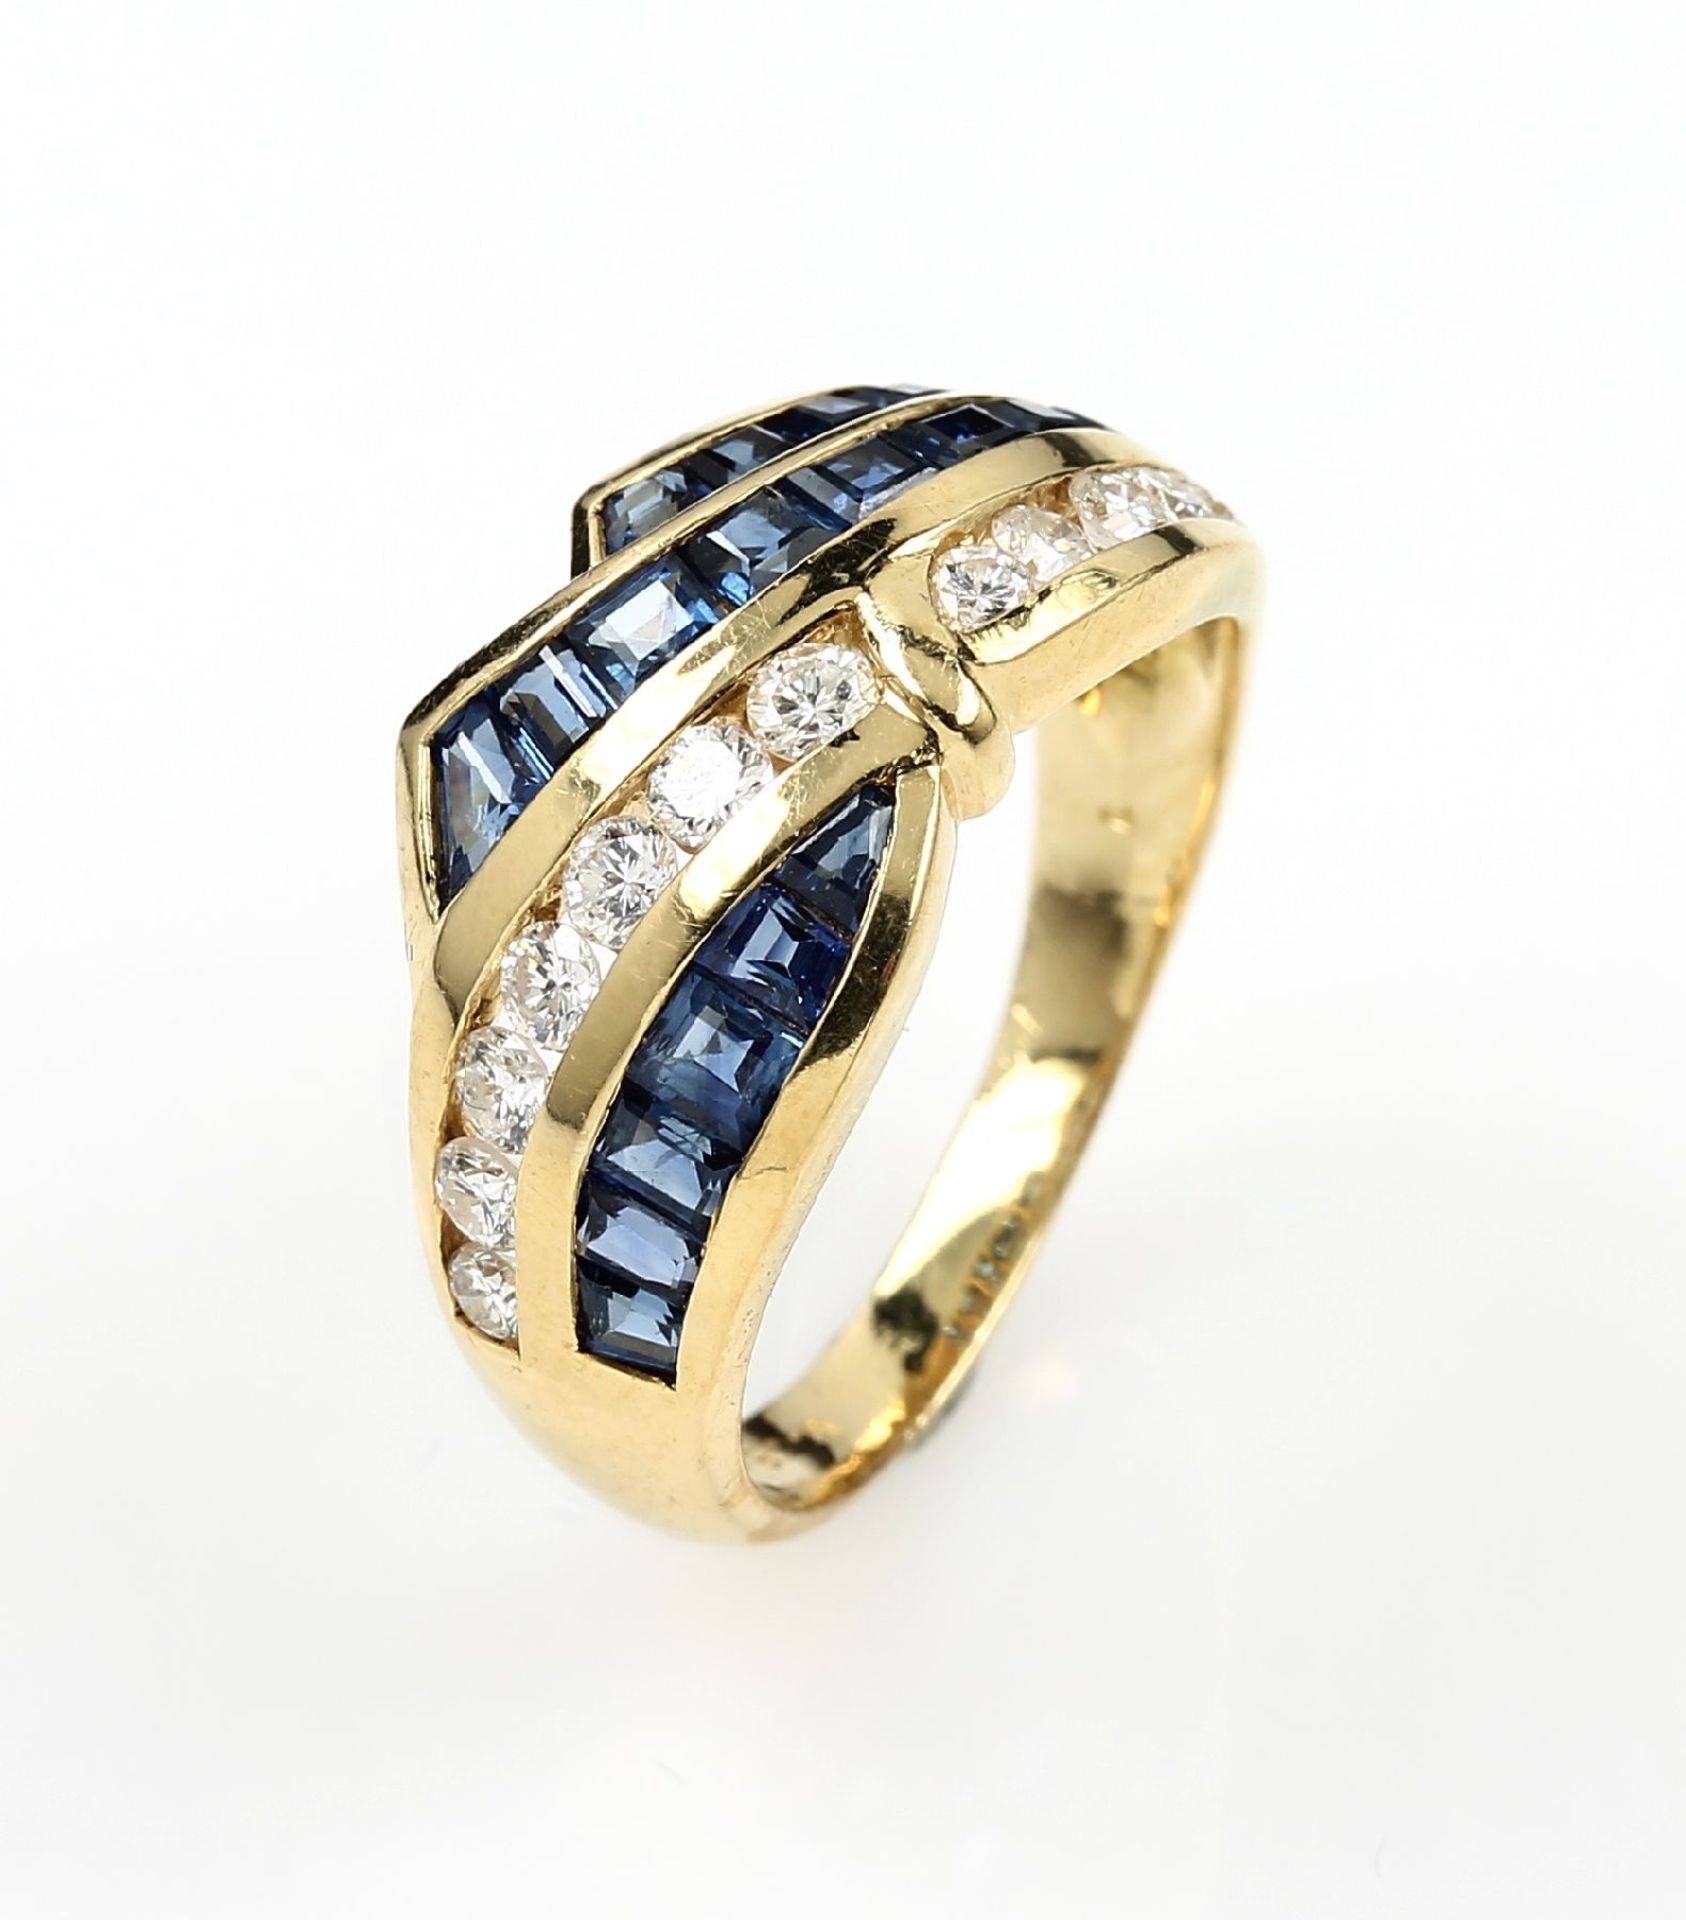 18 kt gold ring with sapphires and brilliants , YG 750/000, 12 brilliants total approx. 0.80 ct